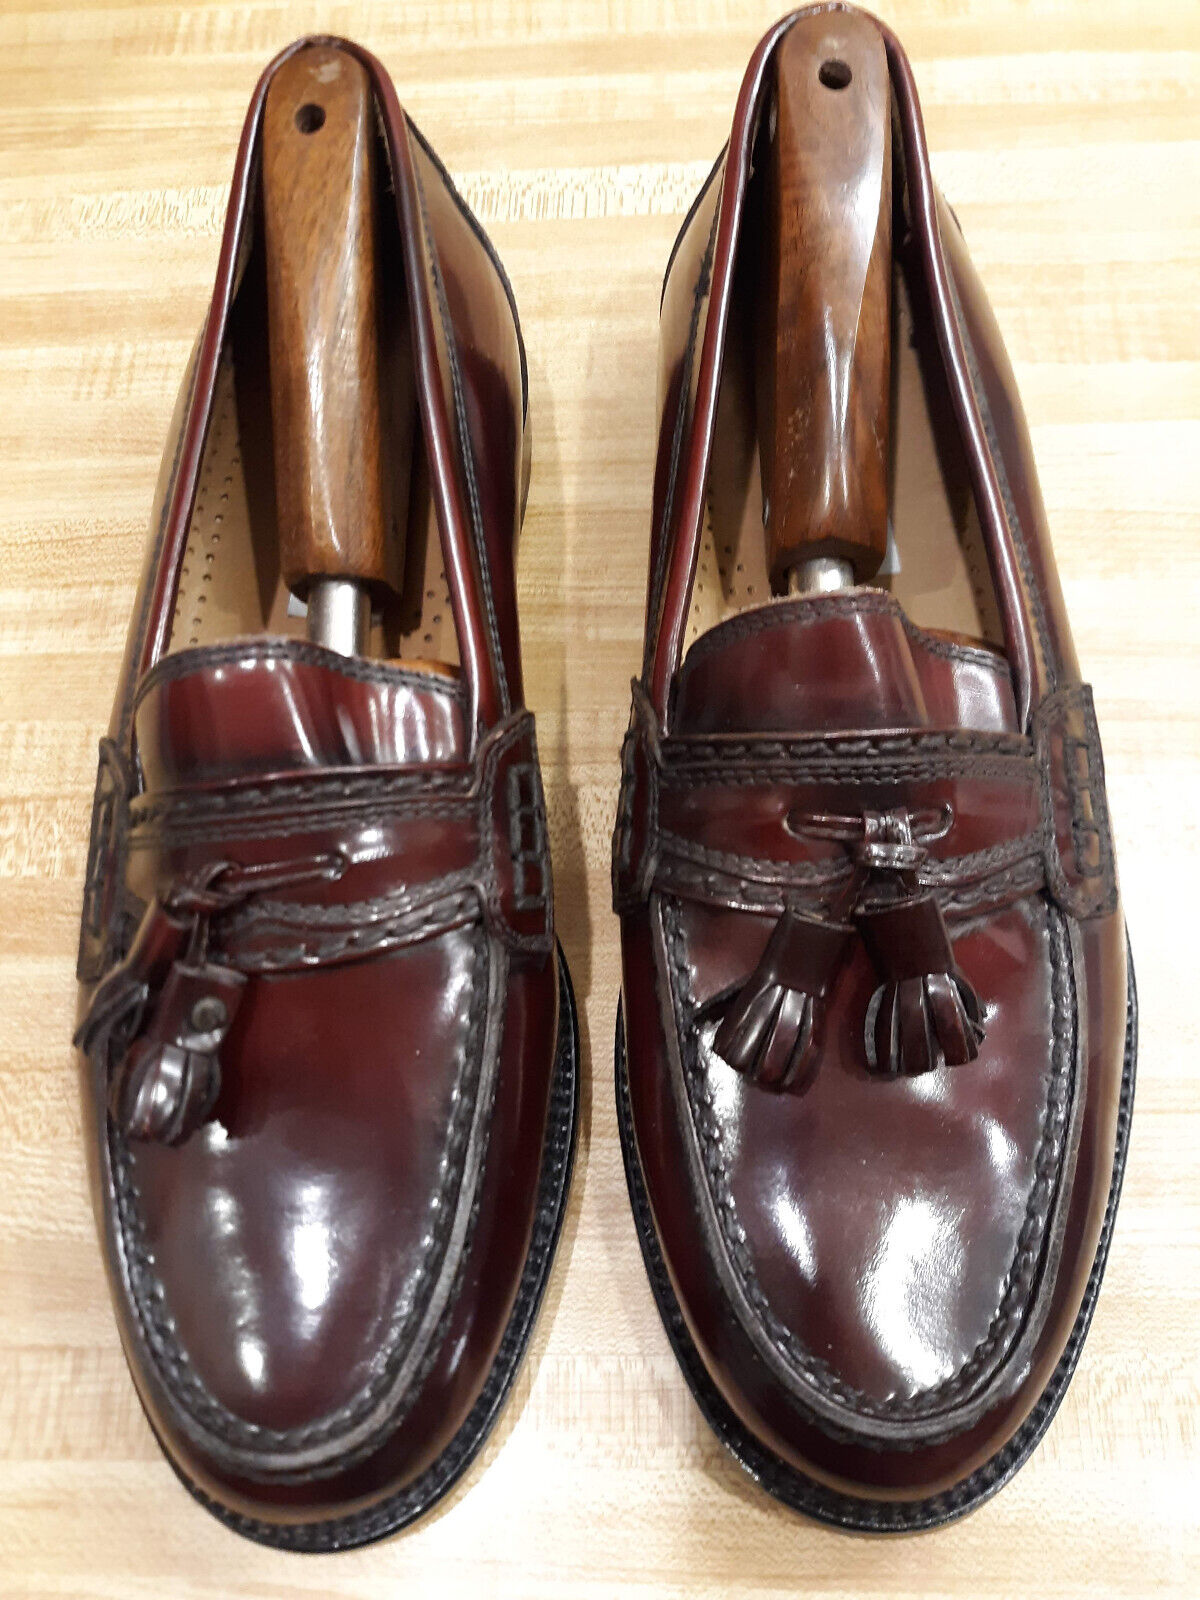 Bally Mens loafers - 8.5 US size - Made in Italy - 